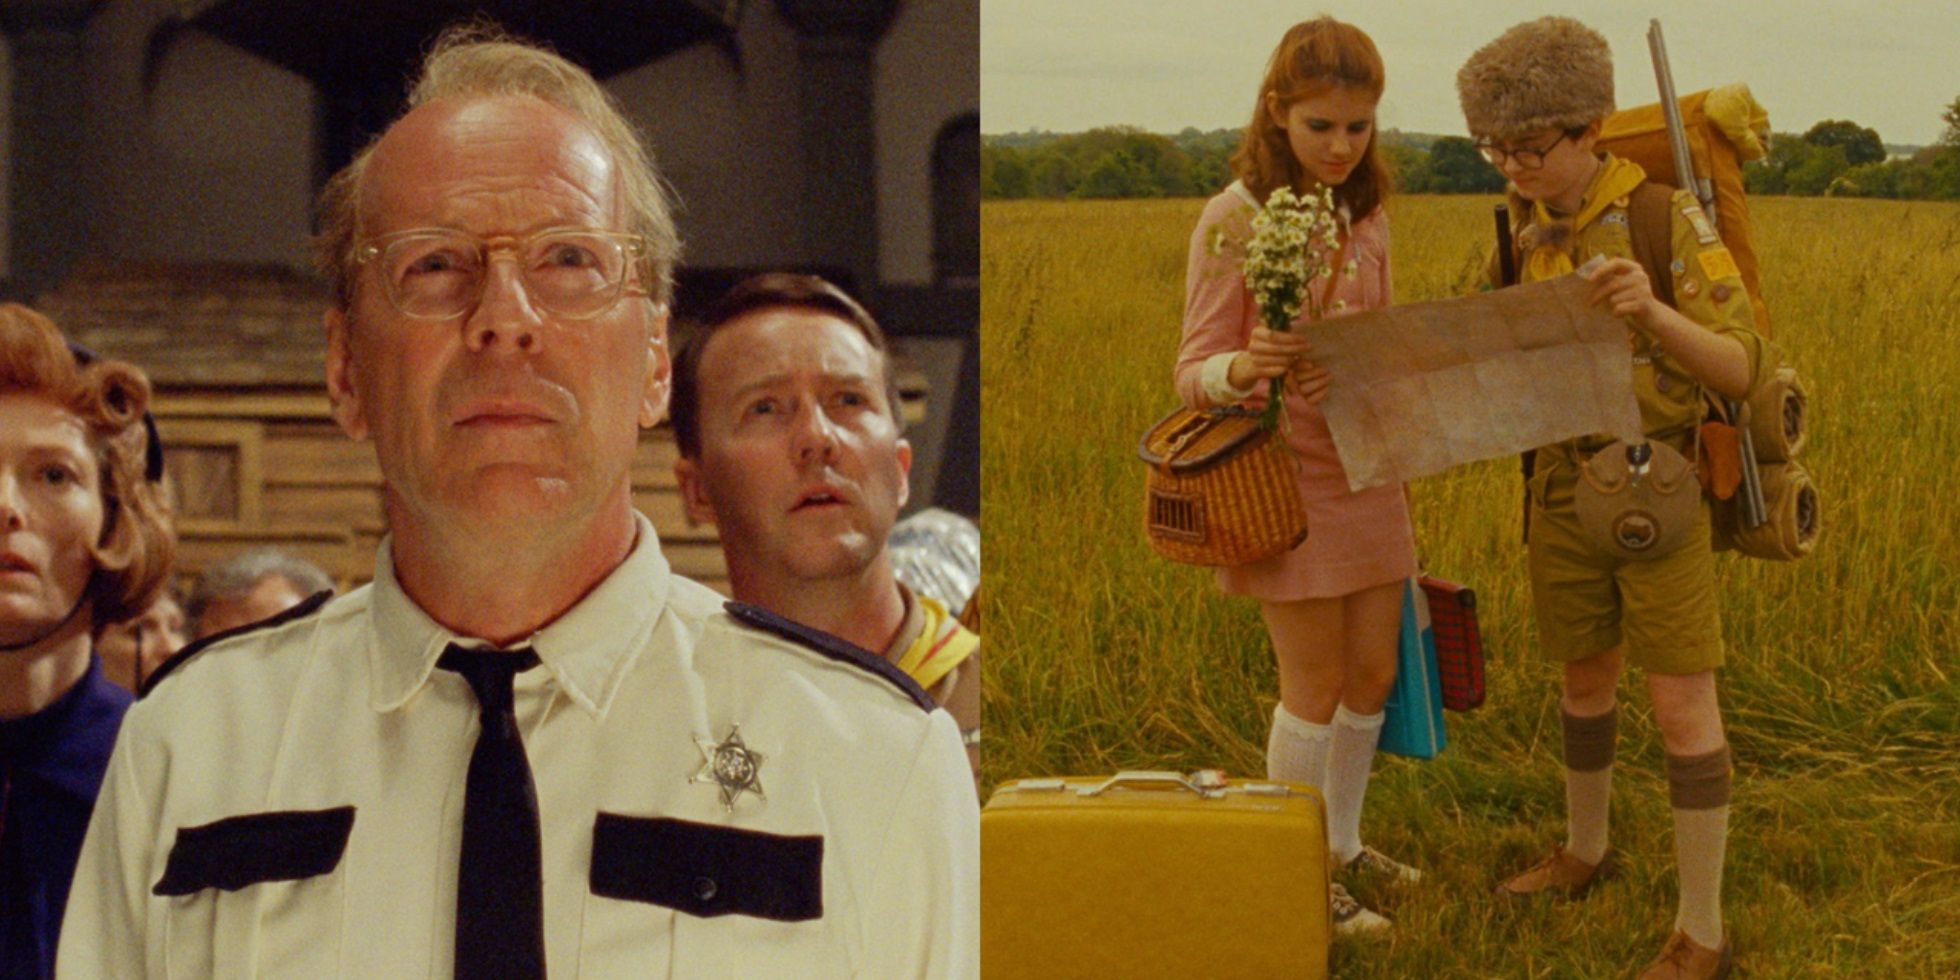 Split image of Captain Sharp in the church and Sam and Suzy in a field in Moonrise Kingdom